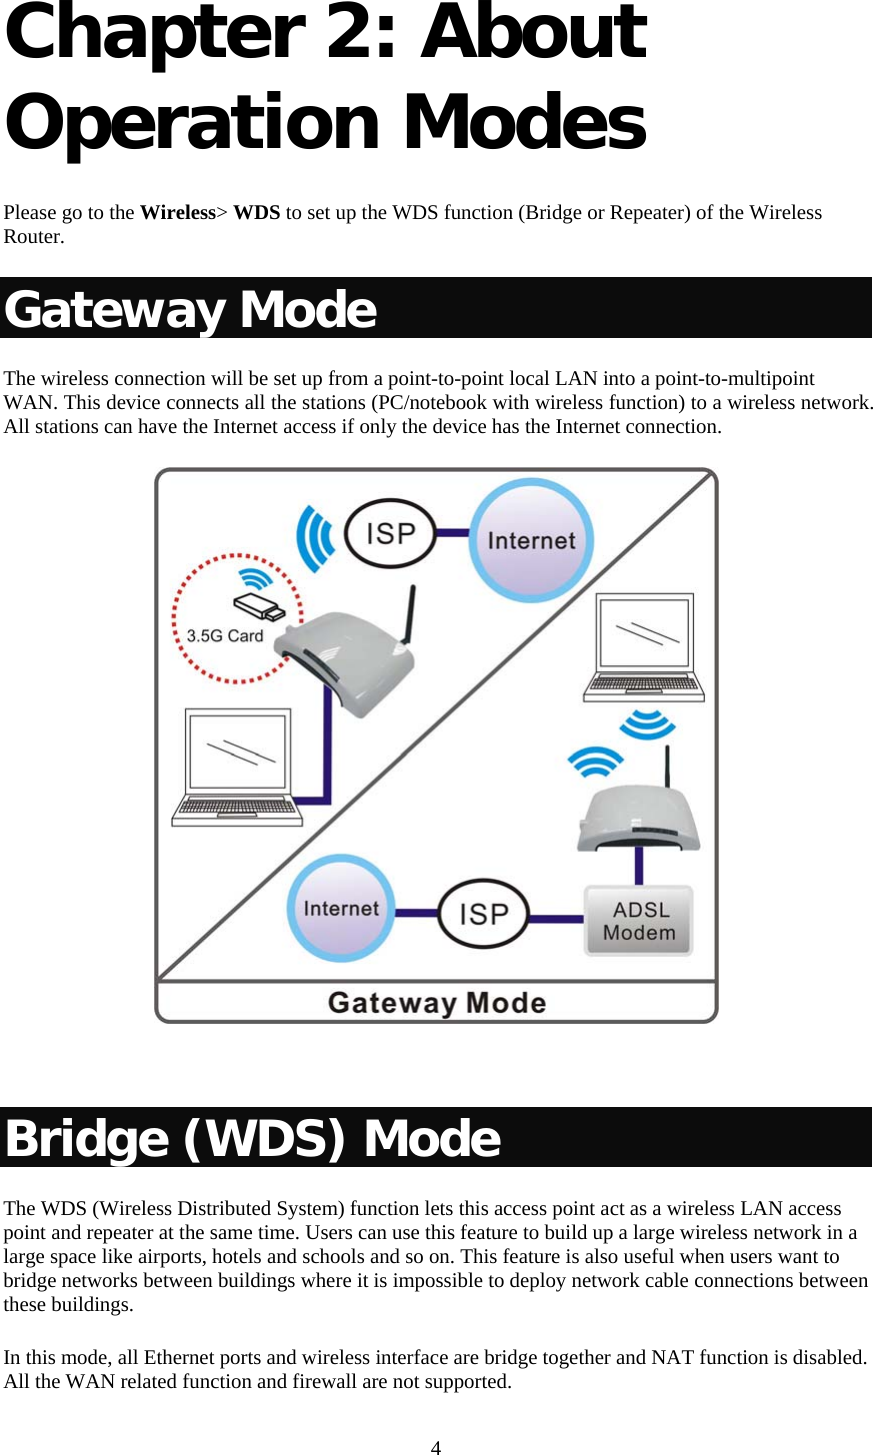   4 Chapter 2: About Operation Modes   Please go to the Wireless&gt; WDS to set up the WDS function (Bridge or Repeater) of the Wireless Router. Gateway Mode The wireless connection will be set up from a point-to-point local LAN into a point-to-multipoint WAN. This device connects all the stations (PC/notebook with wireless function) to a wireless network. All stations can have the Internet access if only the device has the Internet connection.    Bridge (WDS) Mode The WDS (Wireless Distributed System) function lets this access point act as a wireless LAN access point and repeater at the same time. Users can use this feature to build up a large wireless network in a large space like airports, hotels and schools and so on. This feature is also useful when users want to bridge networks between buildings where it is impossible to deploy network cable connections between these buildings.  In this mode, all Ethernet ports and wireless interface are bridge together and NAT function is disabled. All the WAN related function and firewall are not supported.  